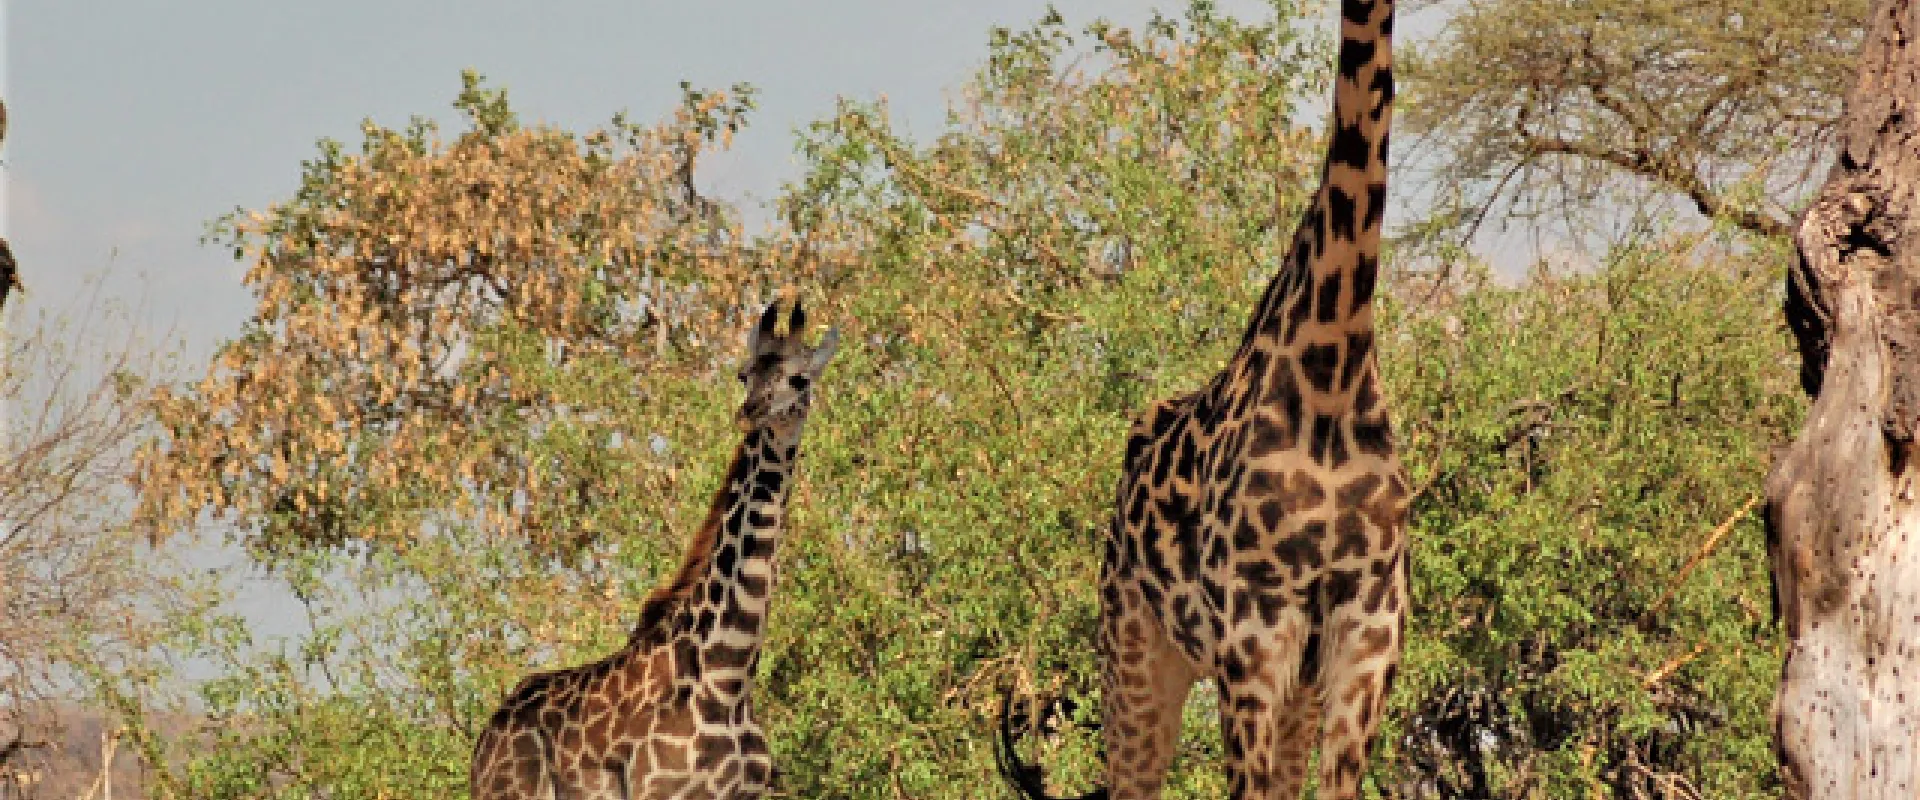 Seeing Spots in Tanzania: What’s the Point of Spots for Giraffe? 